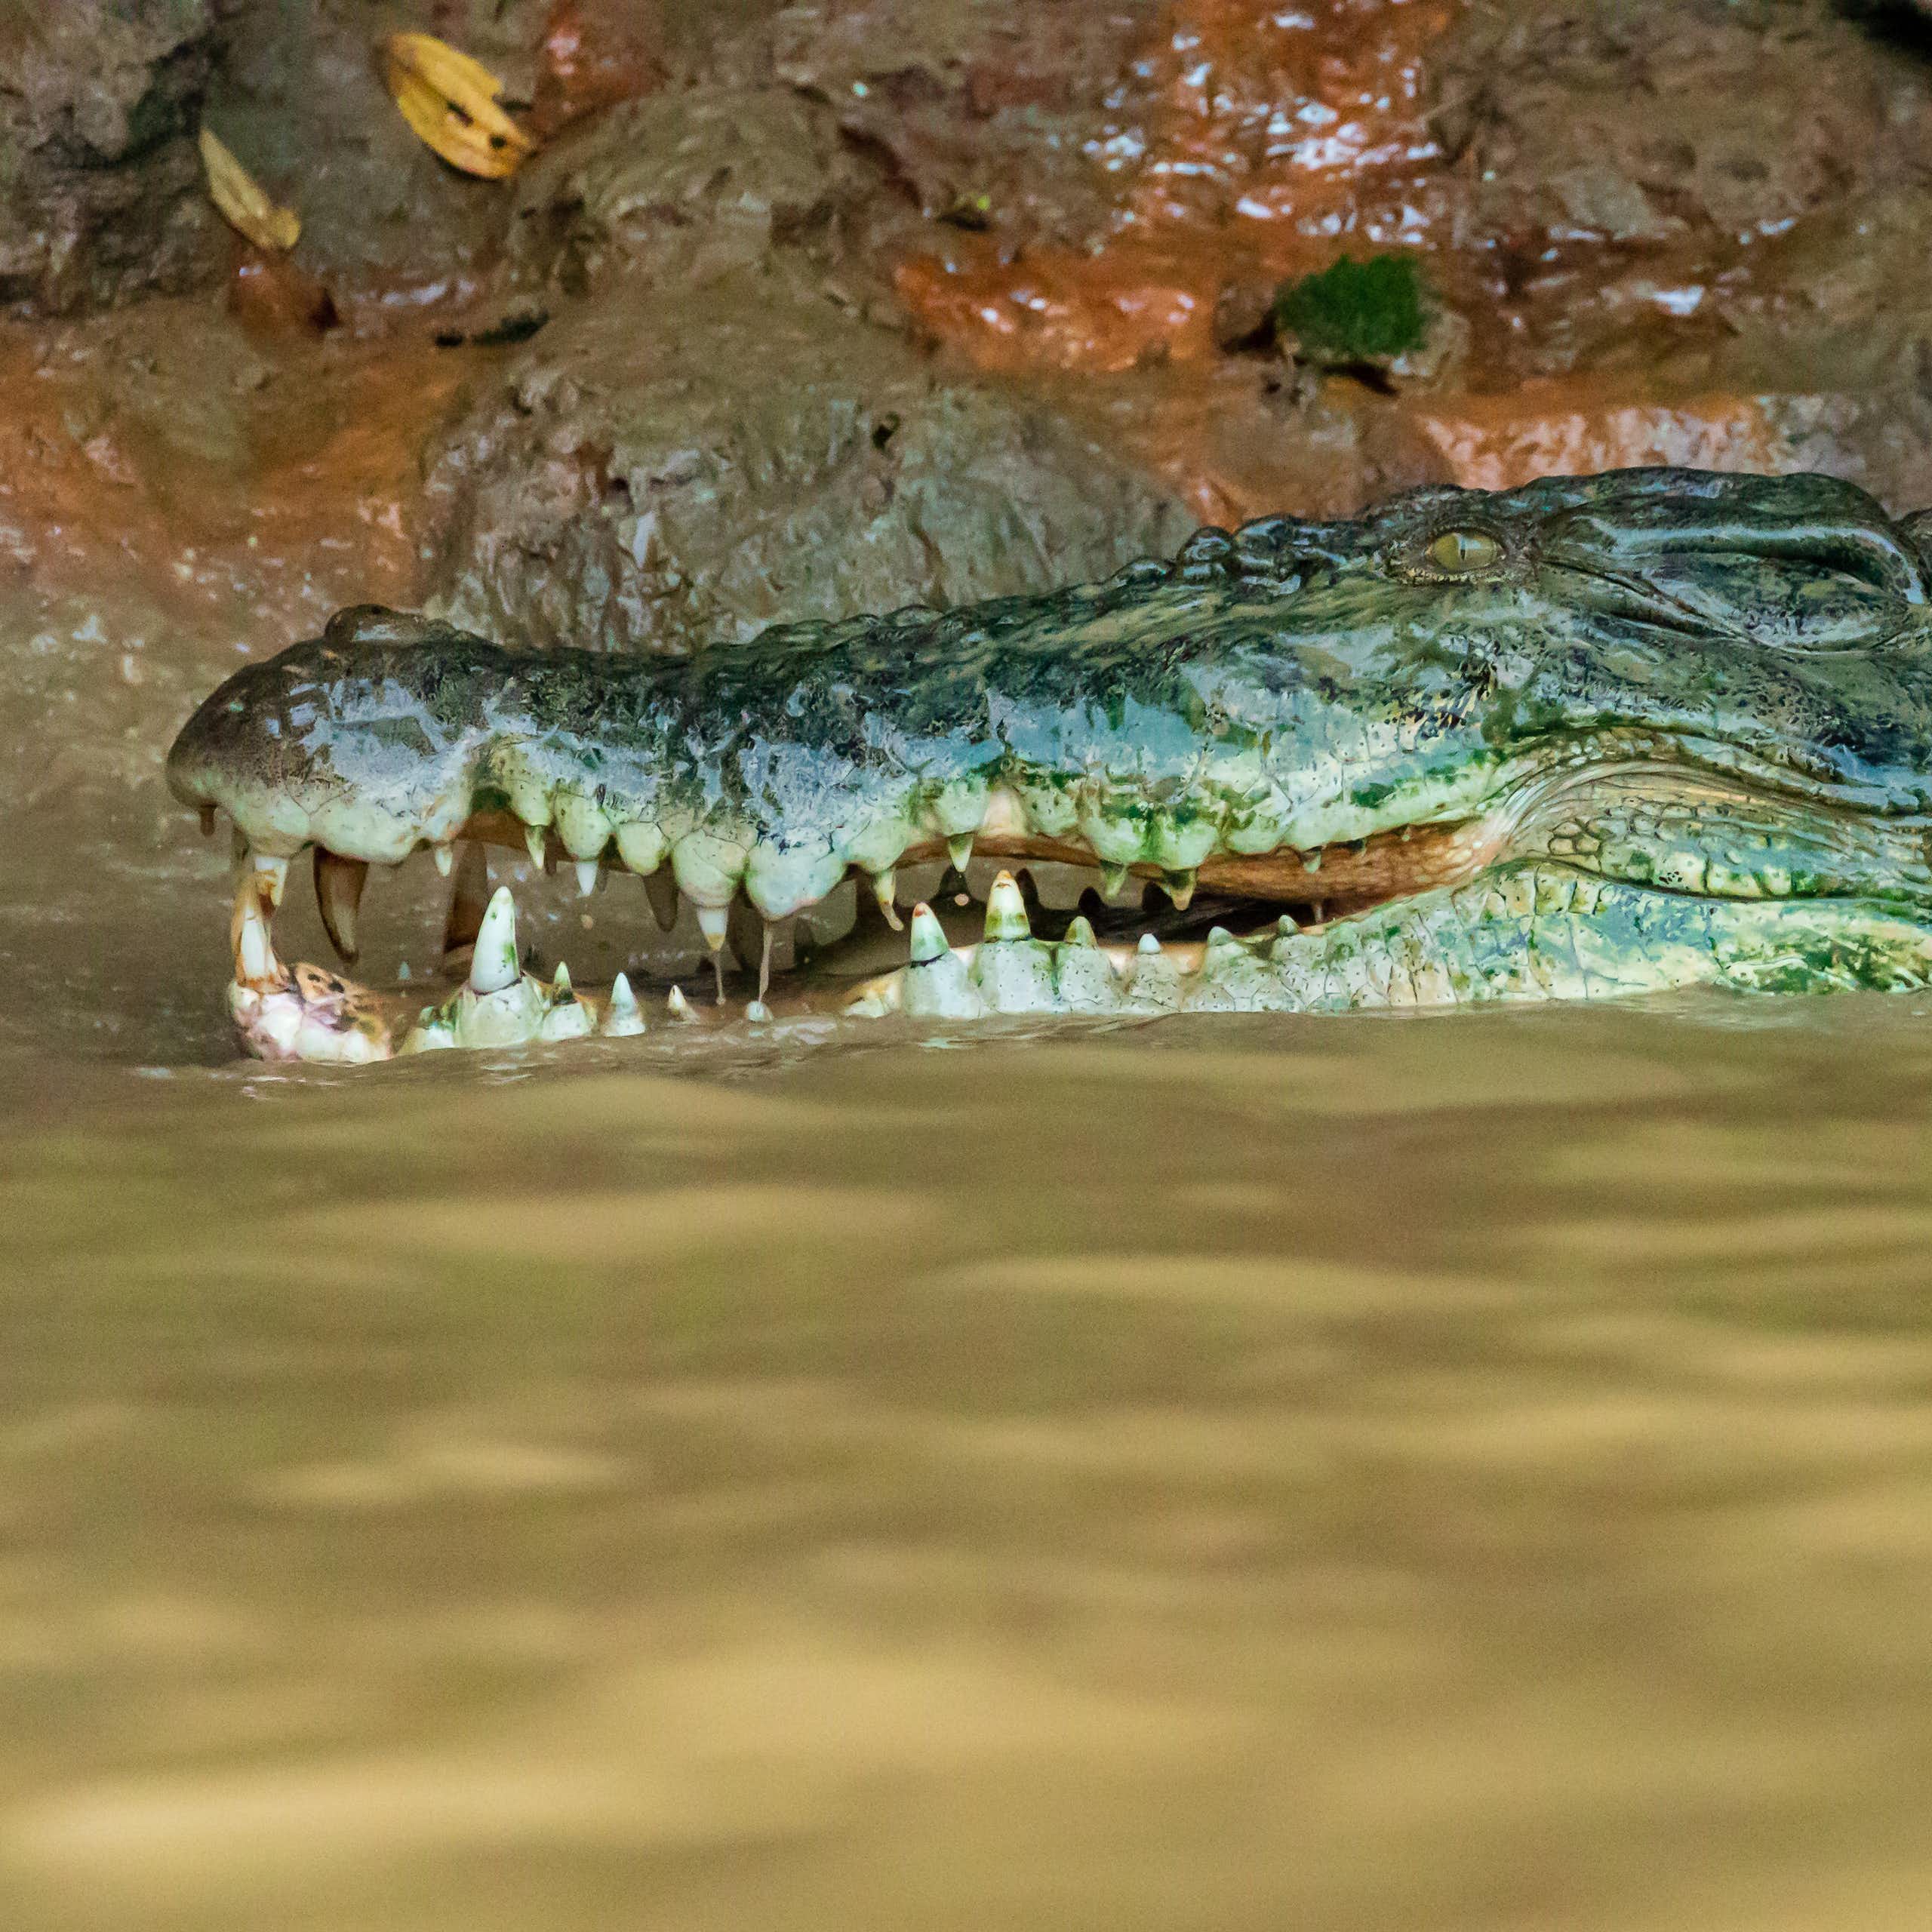 Your smartphone might be linked to crocodile attacks in Indonesia. Here’s how